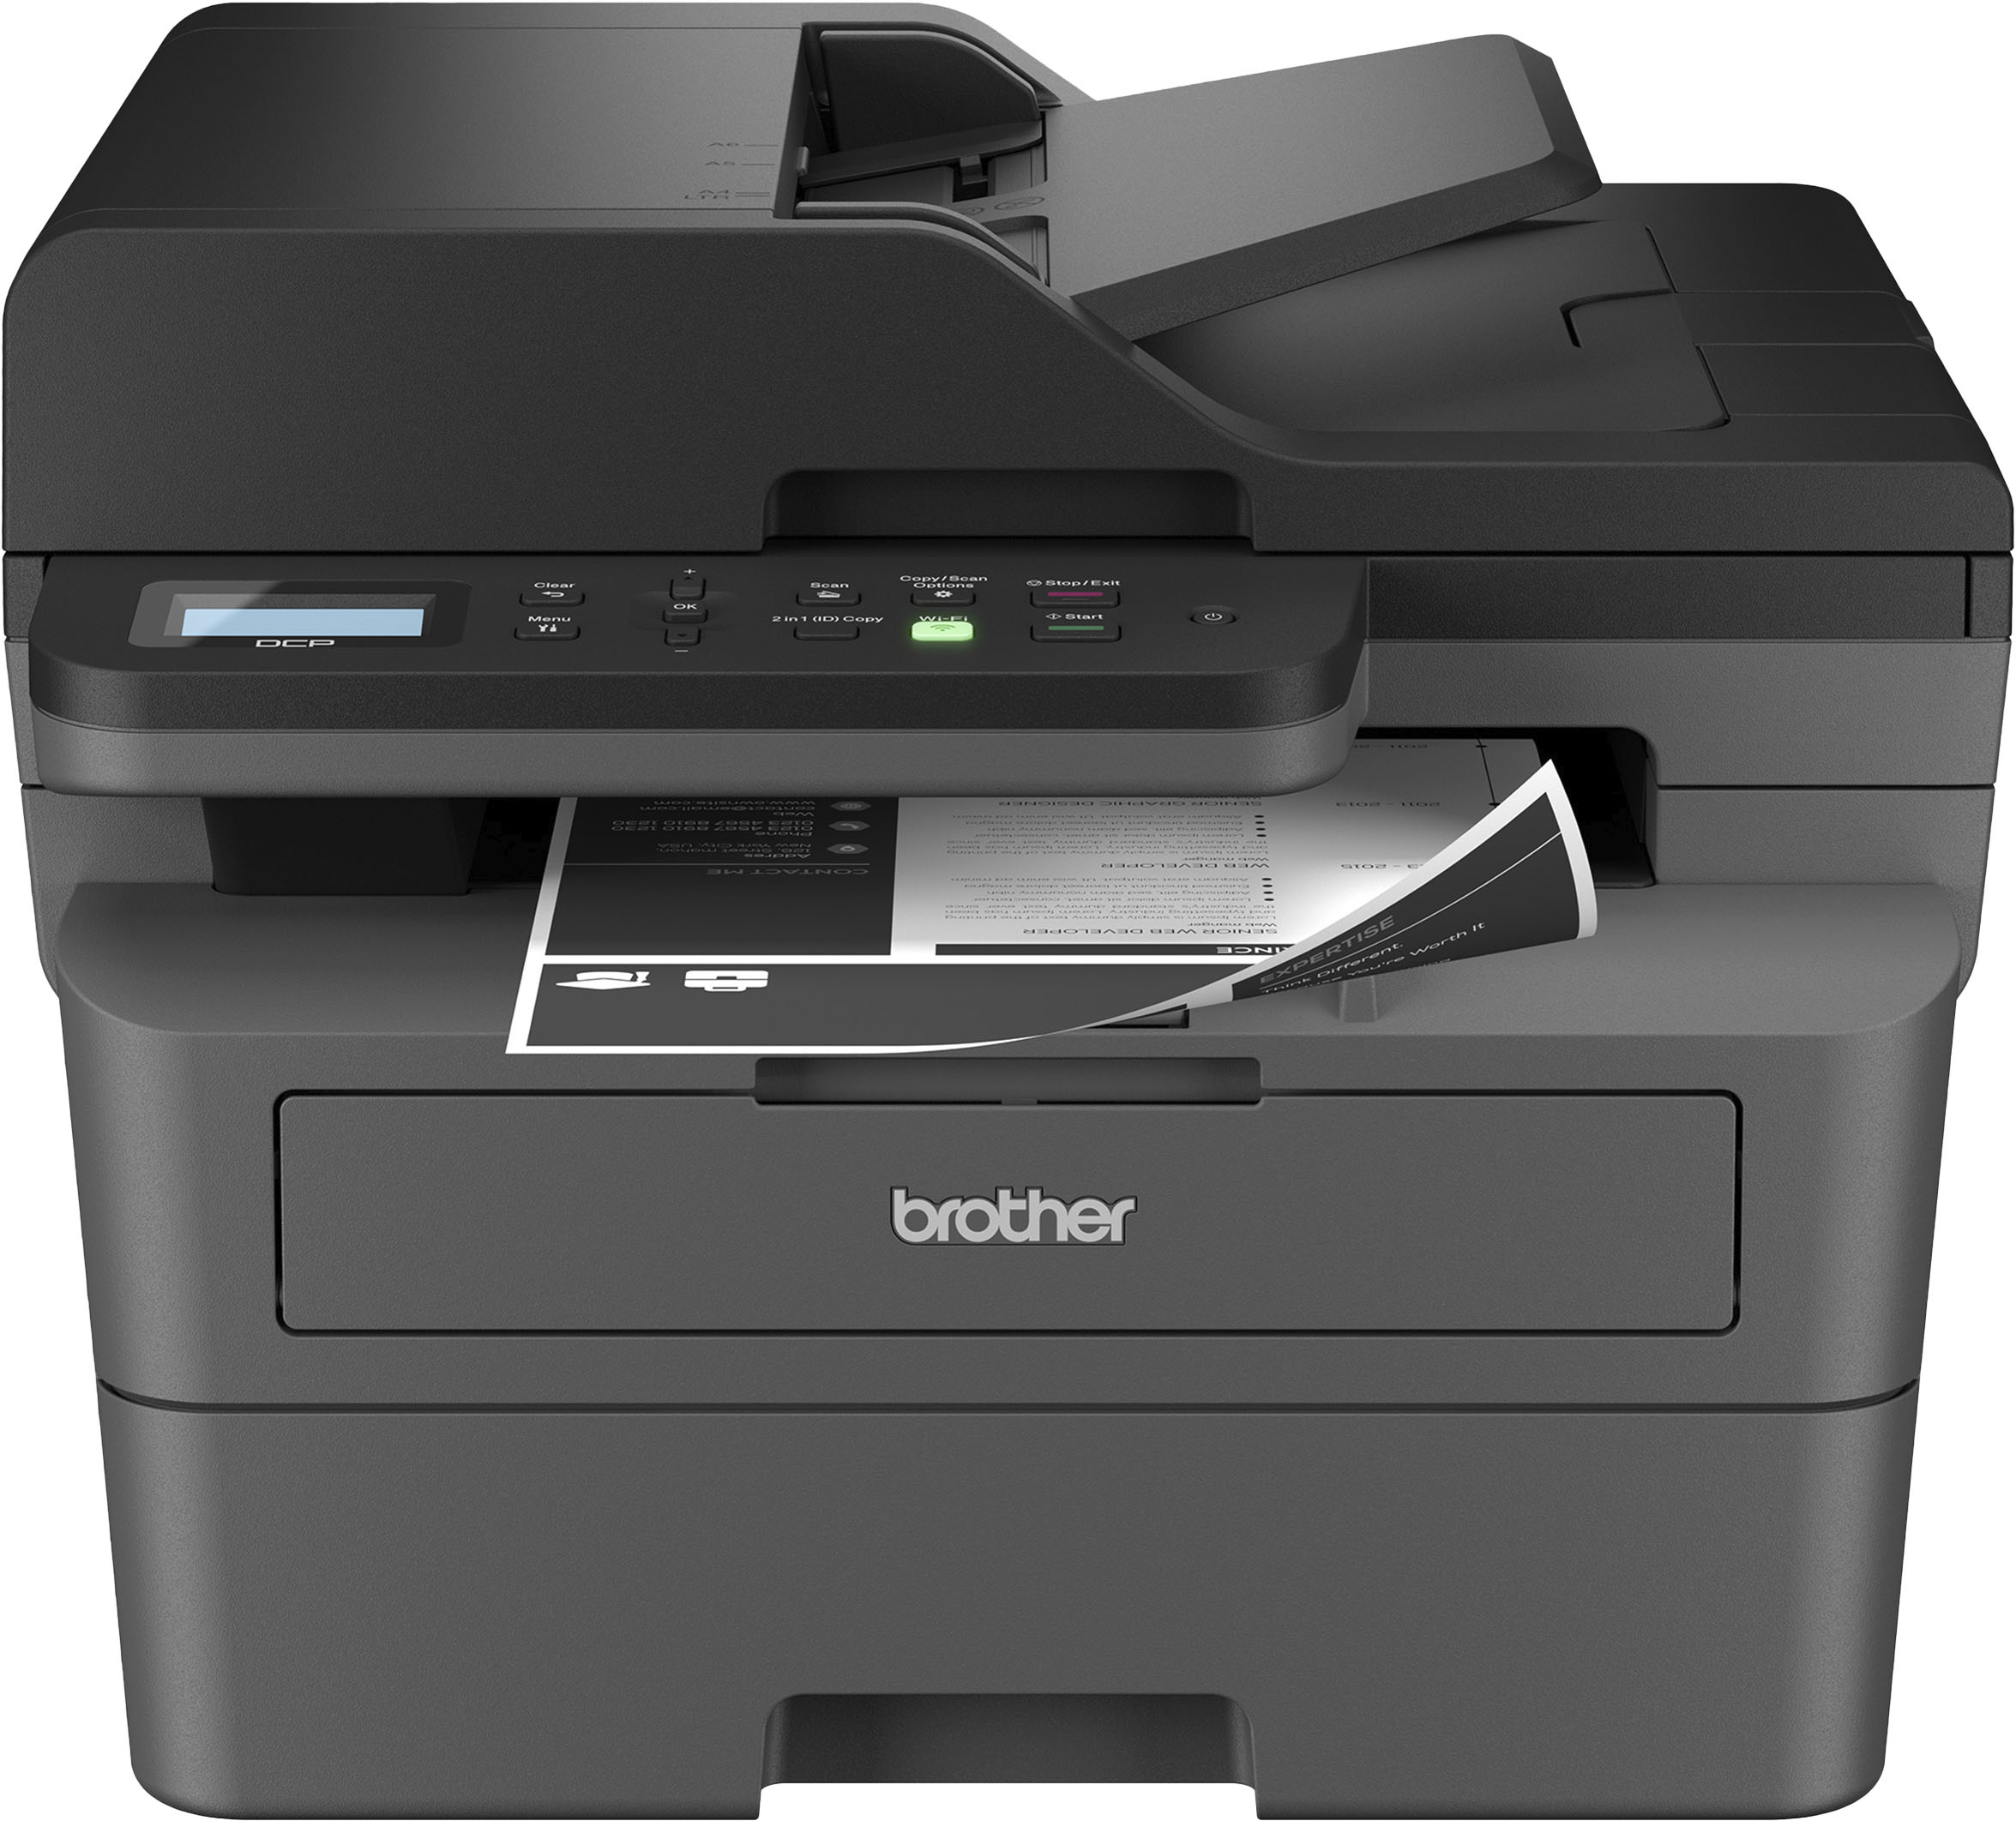 Brother DCP-L2640DW Wireless Compact Monochrome Laser Multifunction Printer